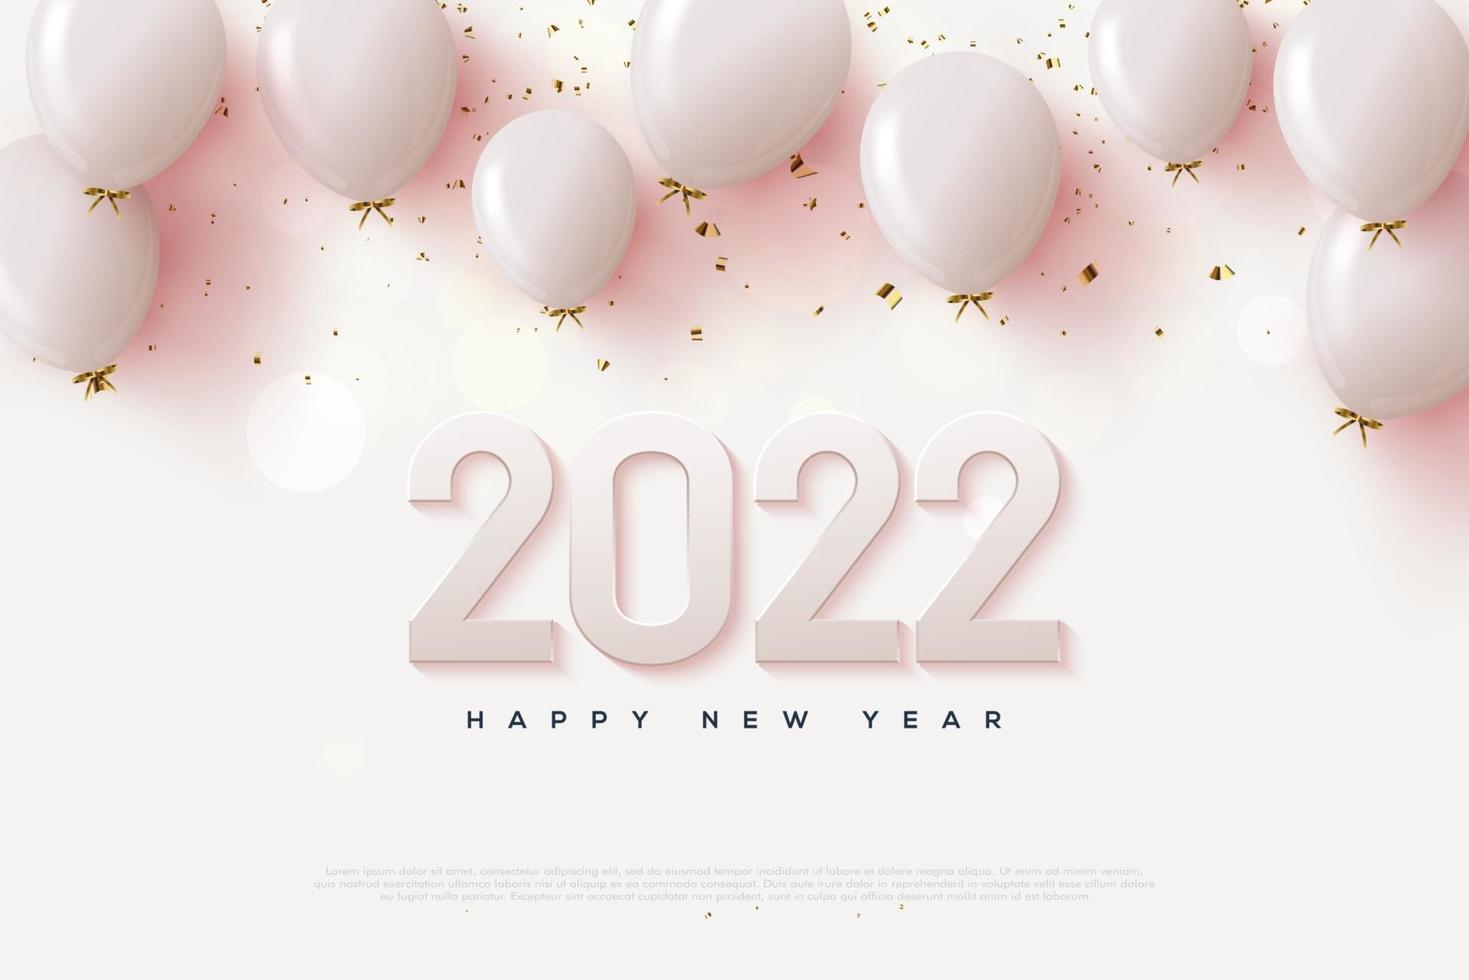 Happy new year 2022 with 3D balloons